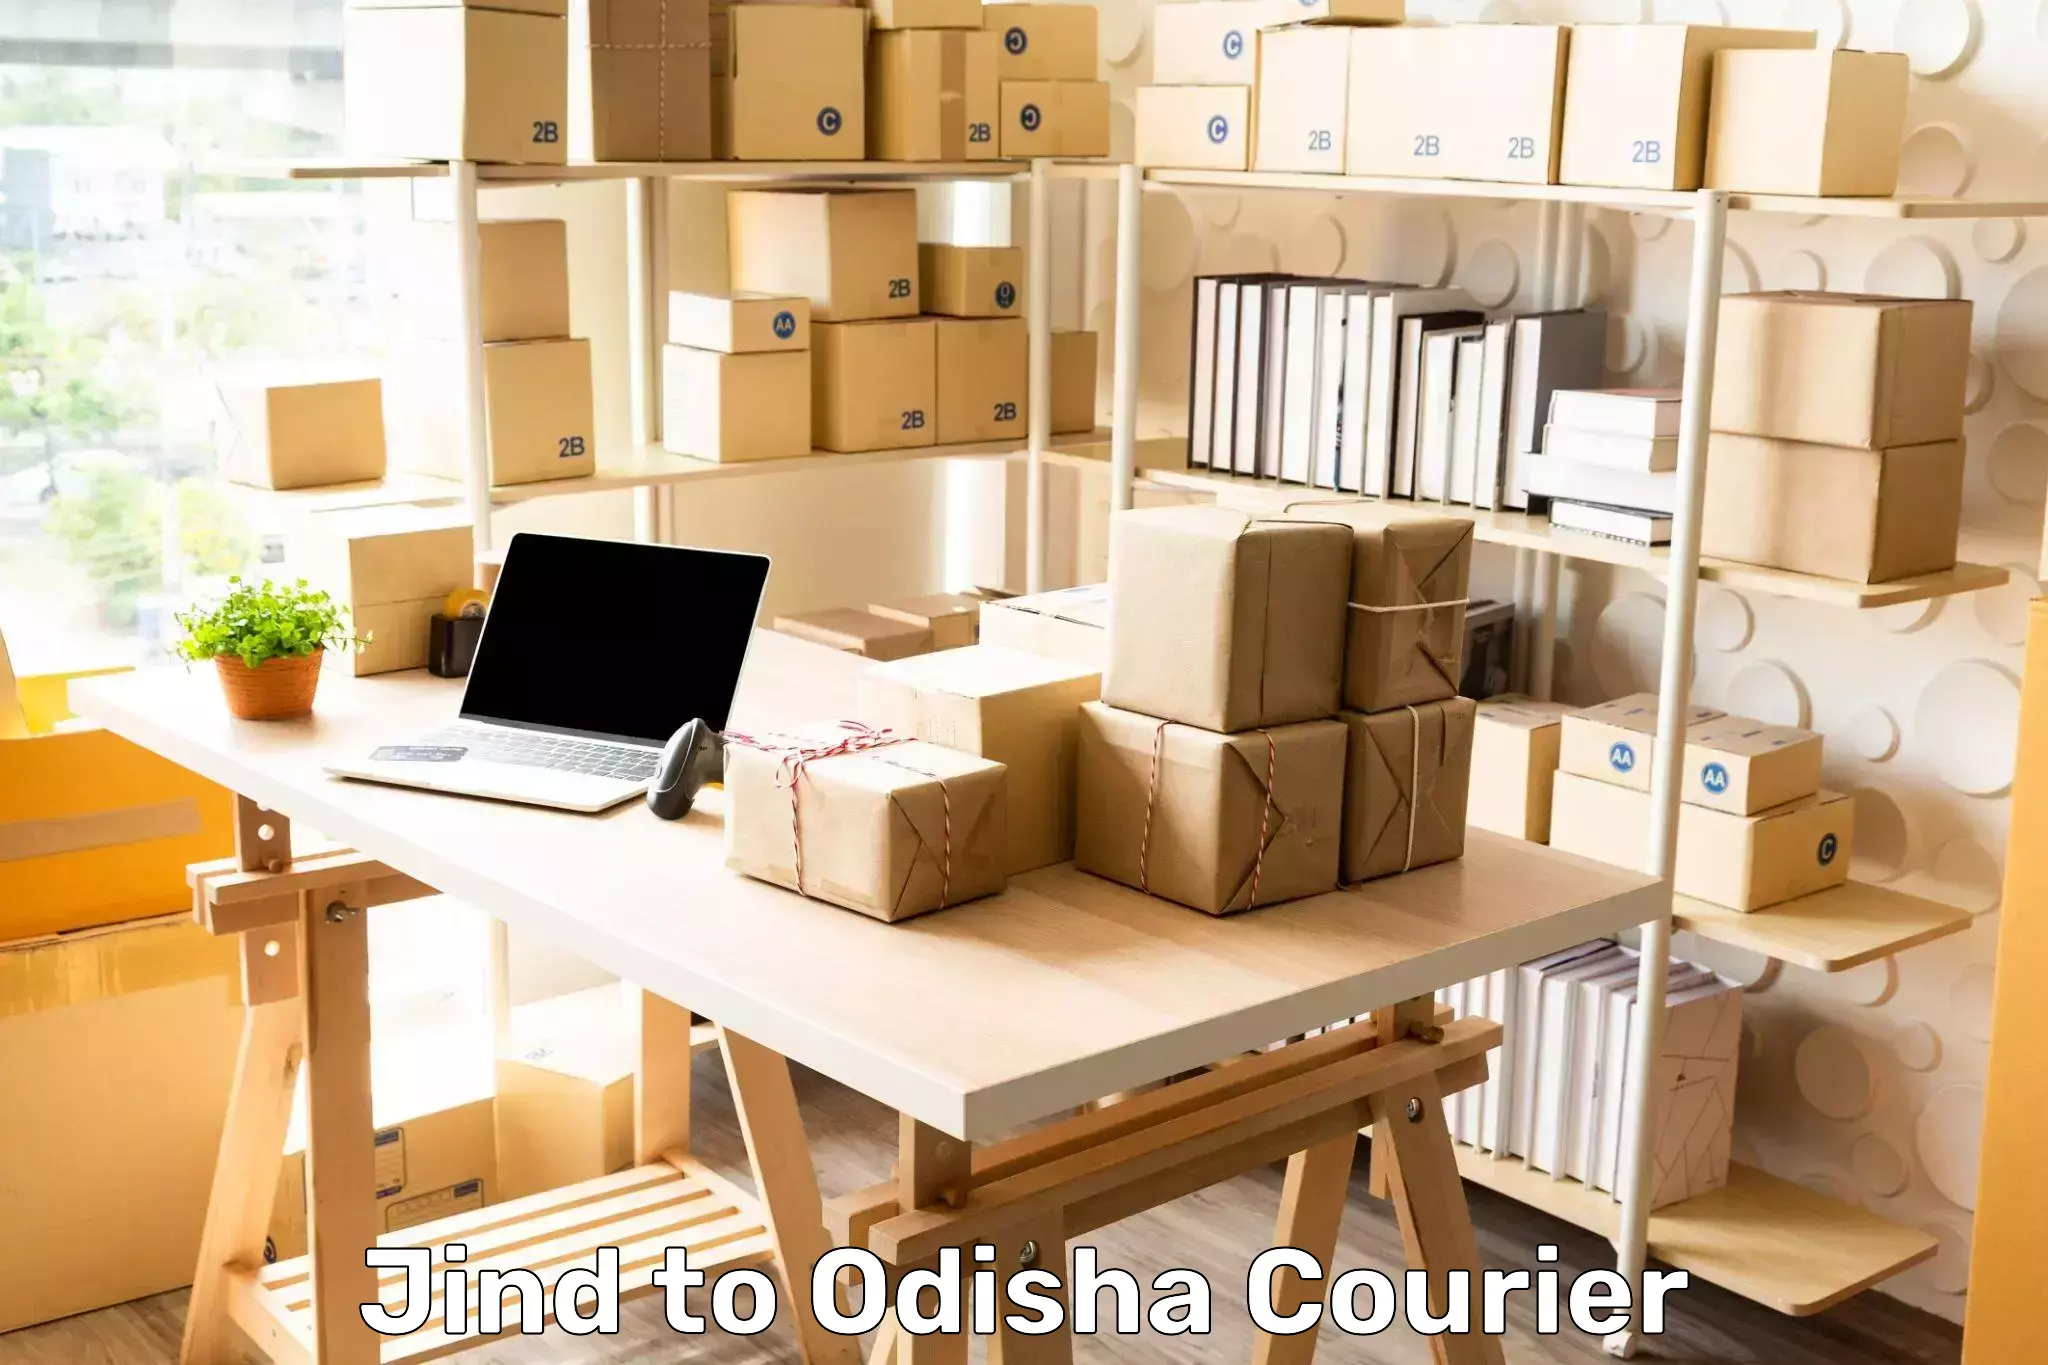 Flexible delivery schedules Jind to Udala